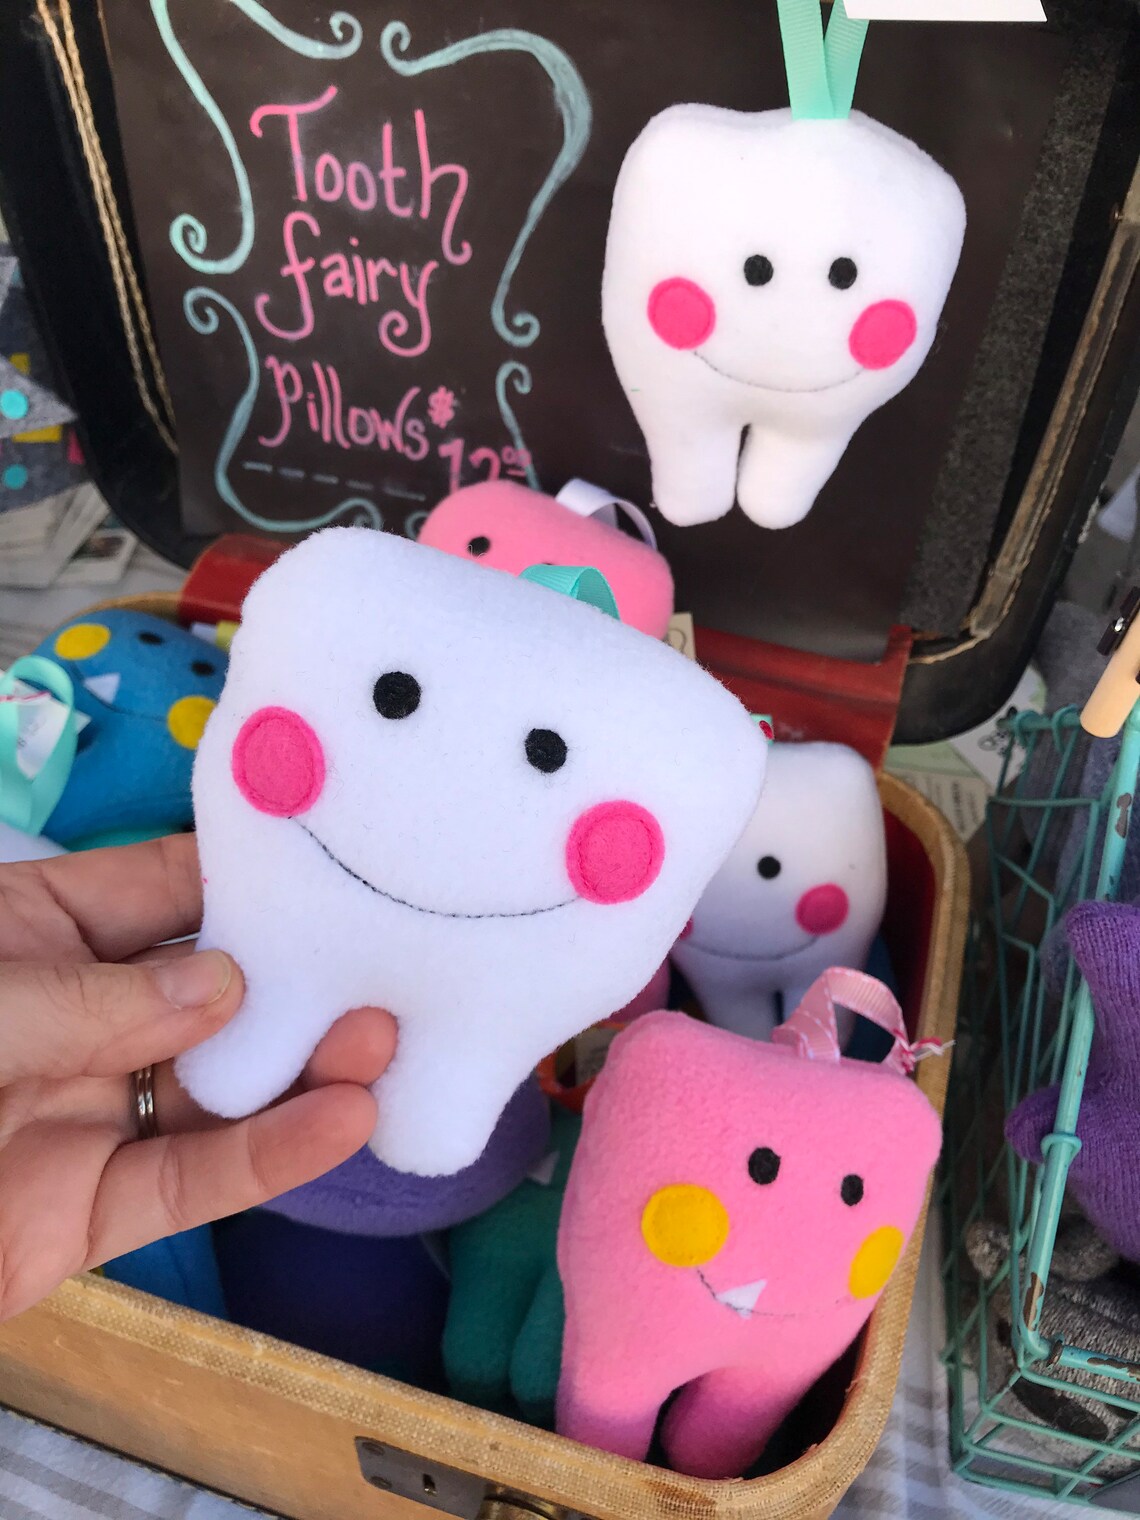 Happy Monster Tooth Fairy Pillow